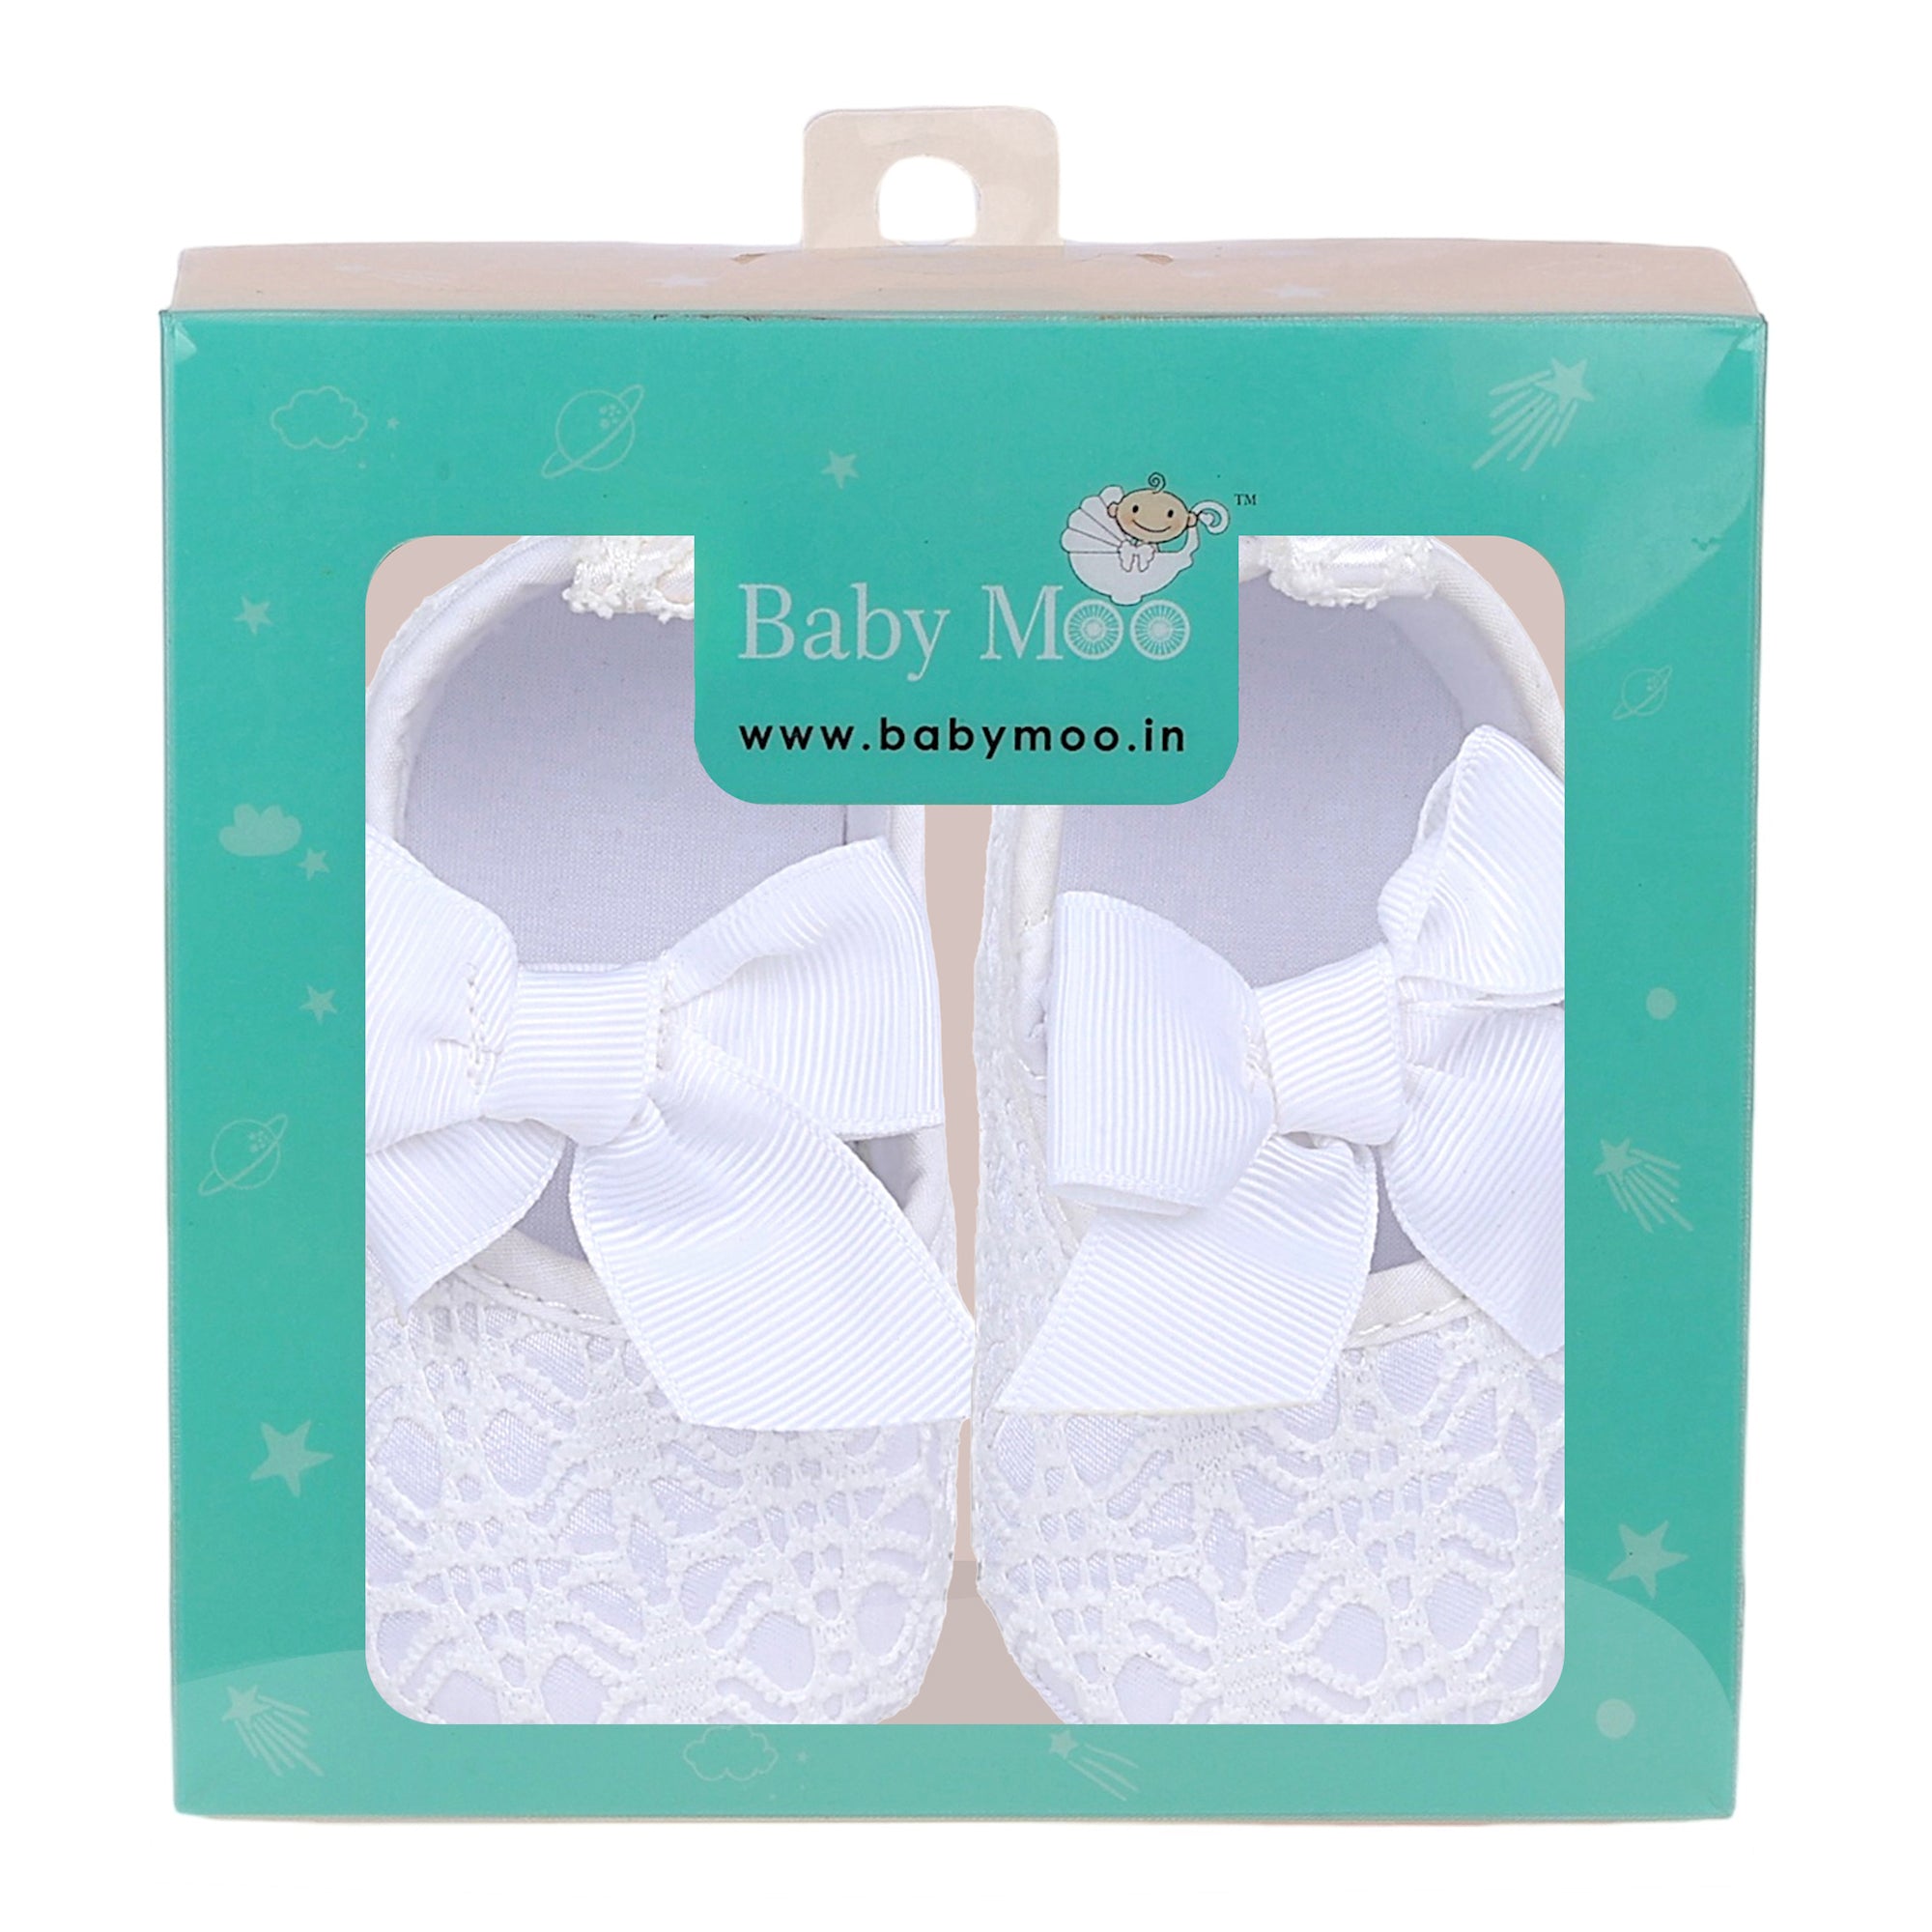 Baby Moo Big Bow Satin Lace Elastic Strap Ballerina Booties - White